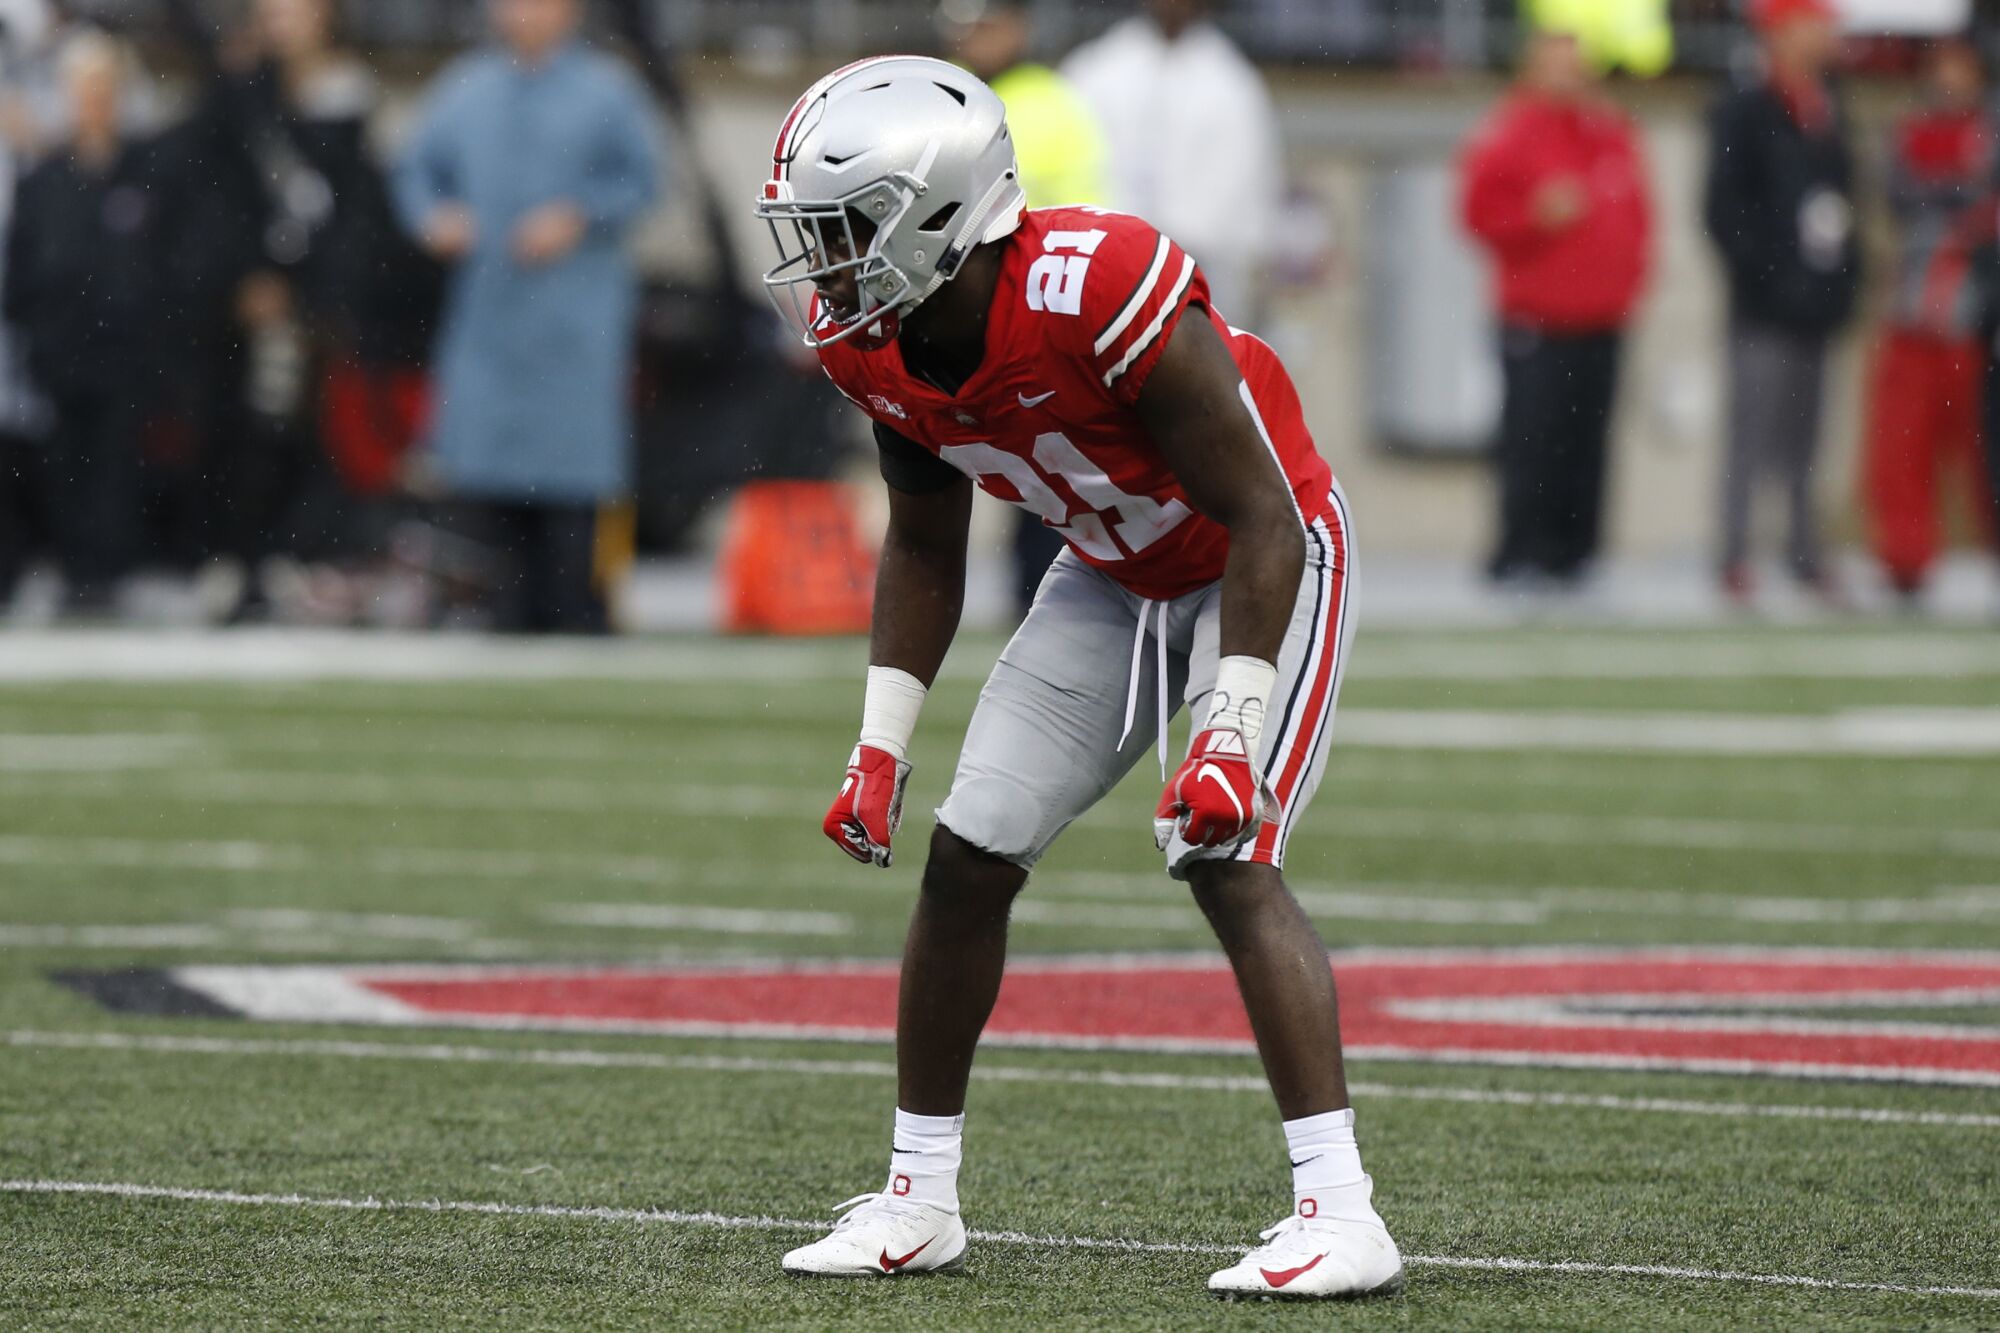 Ohio State defensive back Marcus Williamson plays against Rutgers in September 2018.